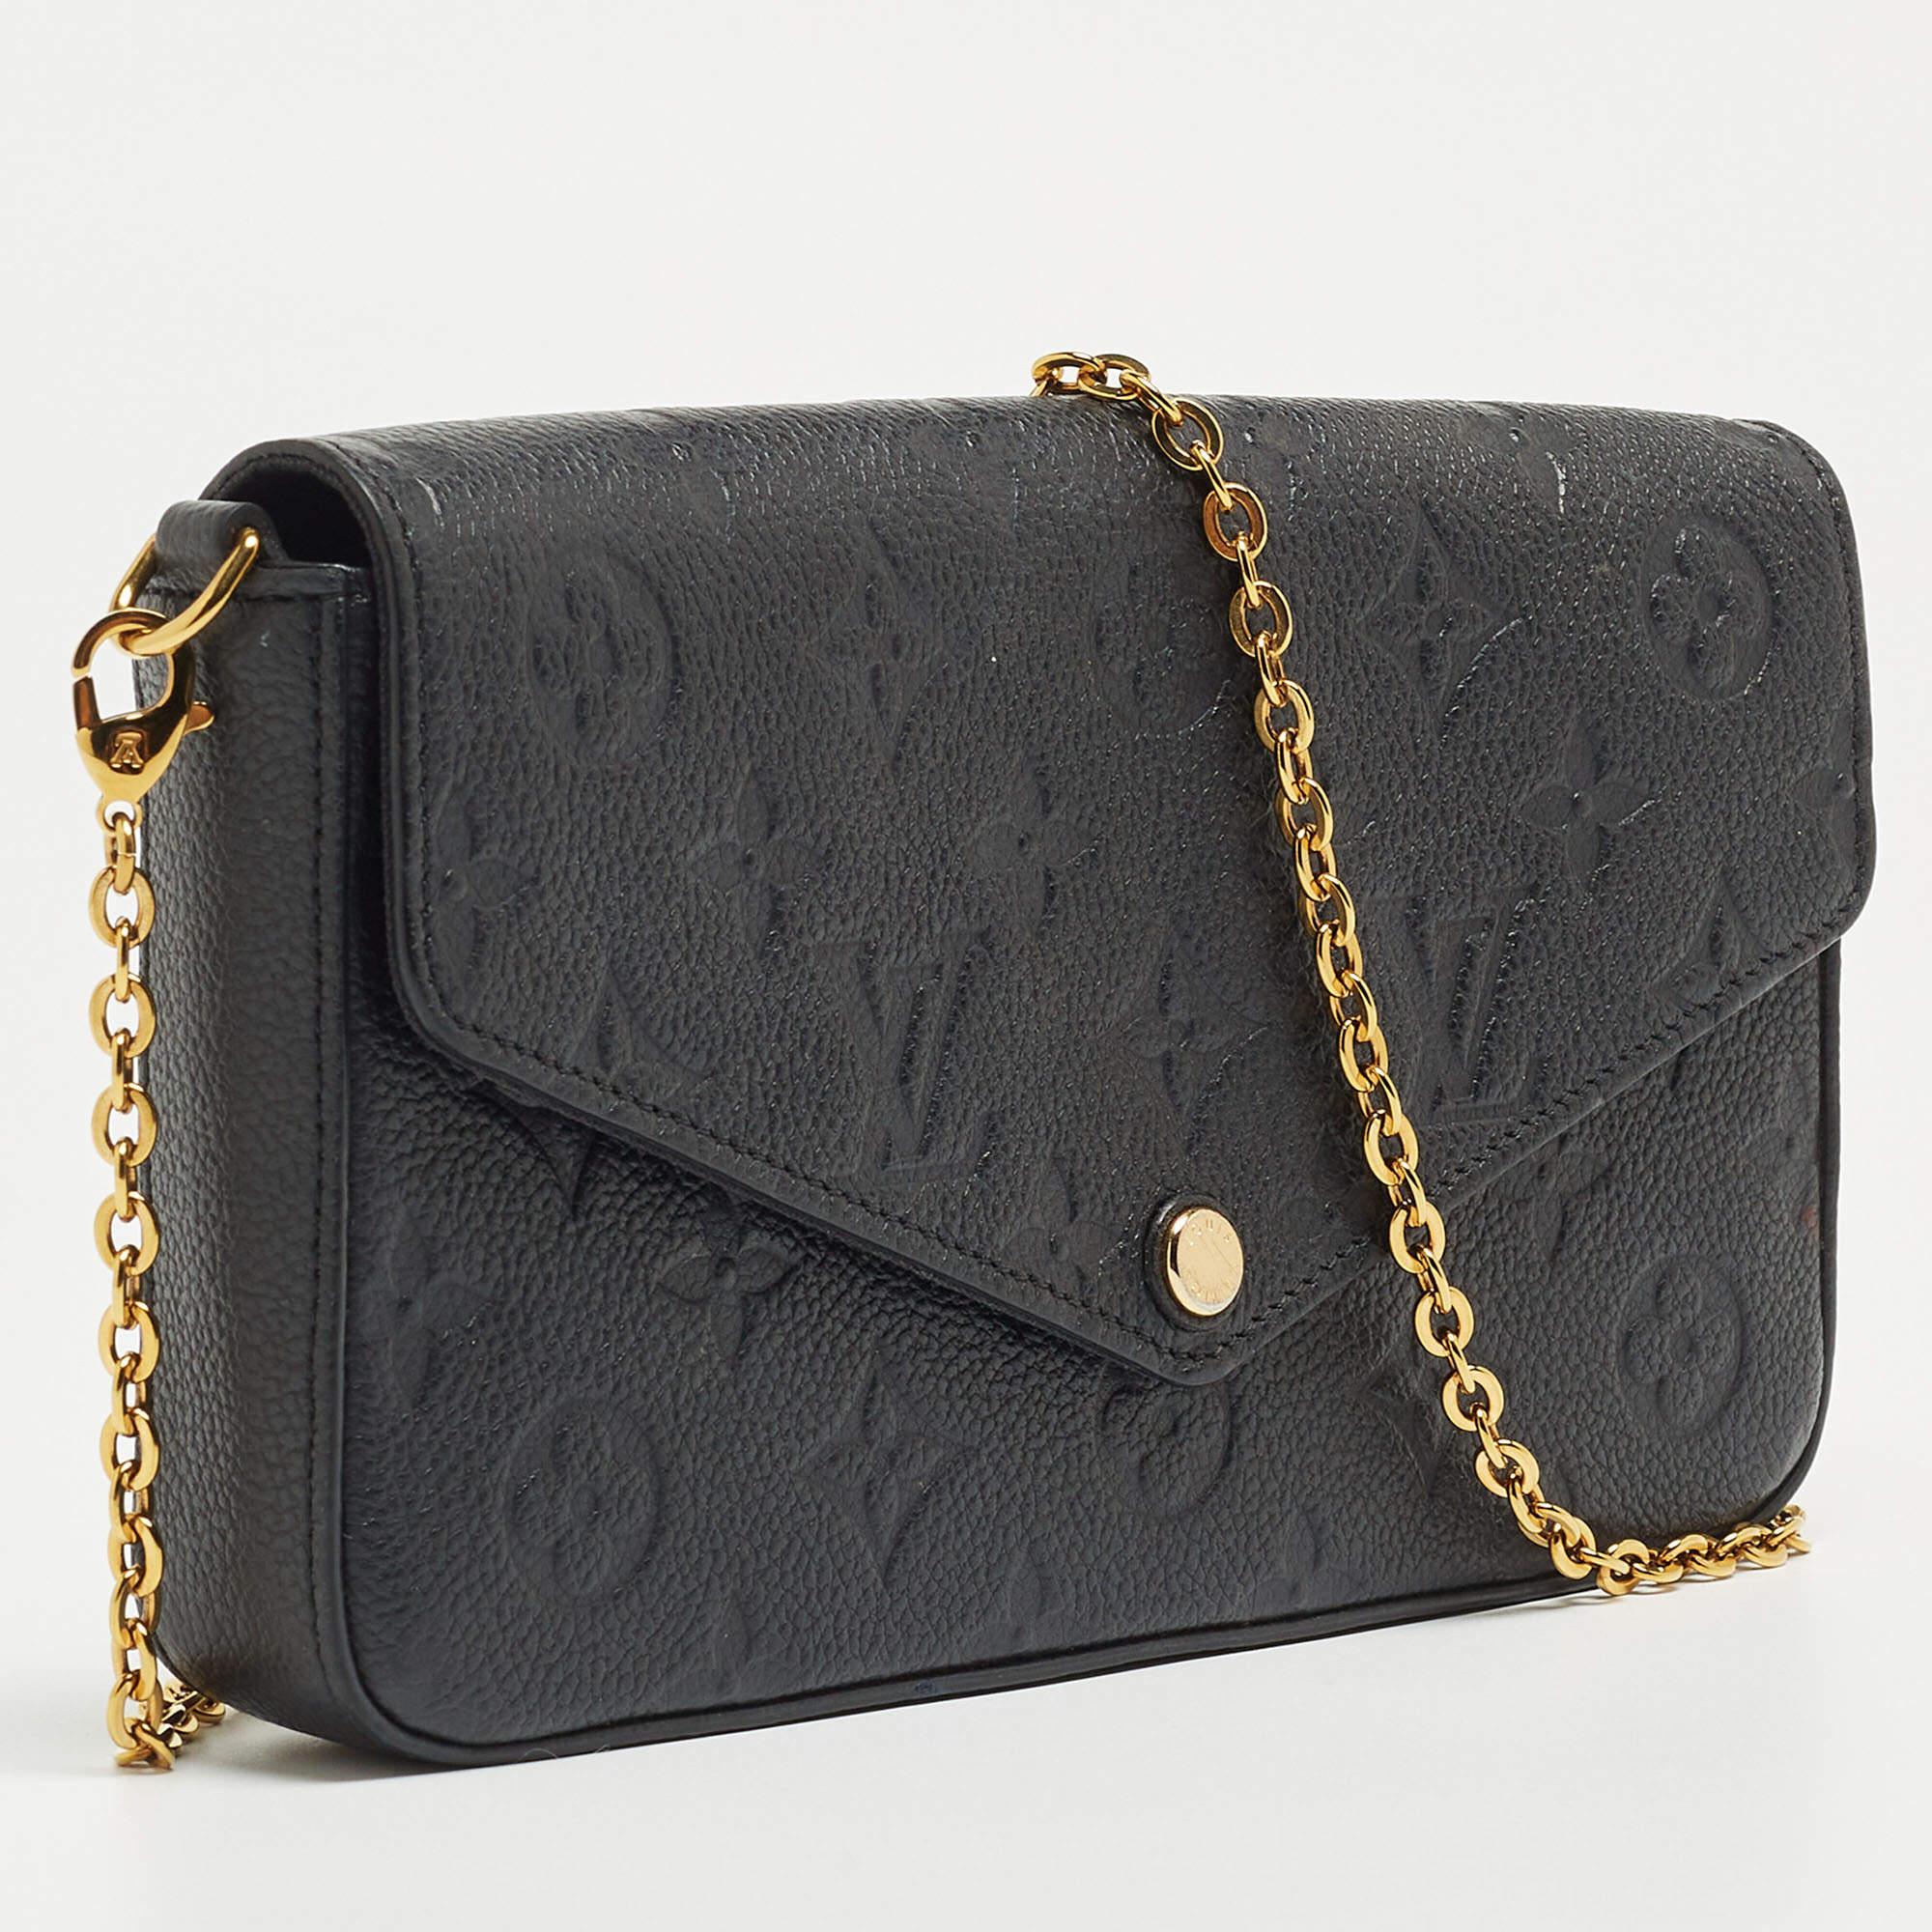 This Pochette Félicie has been designed to be a shoulder bag as well as a clutch. It is crafted from black Monogram Empreinte leather and has a canvas-lined interior, an envelope flap, and a gold-tone chain. The bag comes in a convenient size that